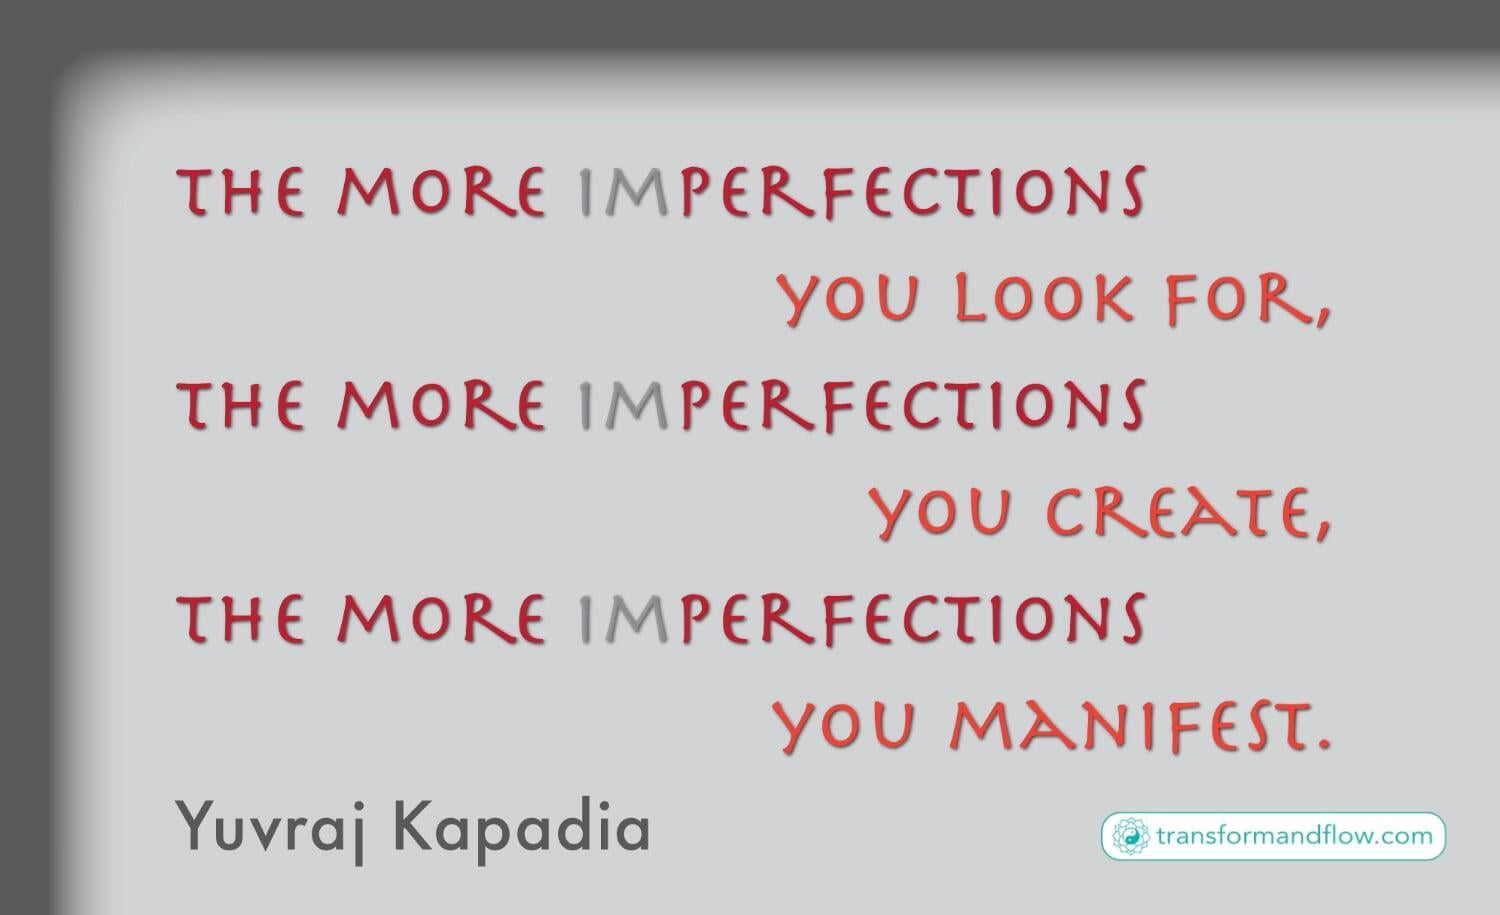 The more (im)perfections you look for, the more (im)perfections you create, the more (im)perfections you manifest. Yuvraj Kapadia